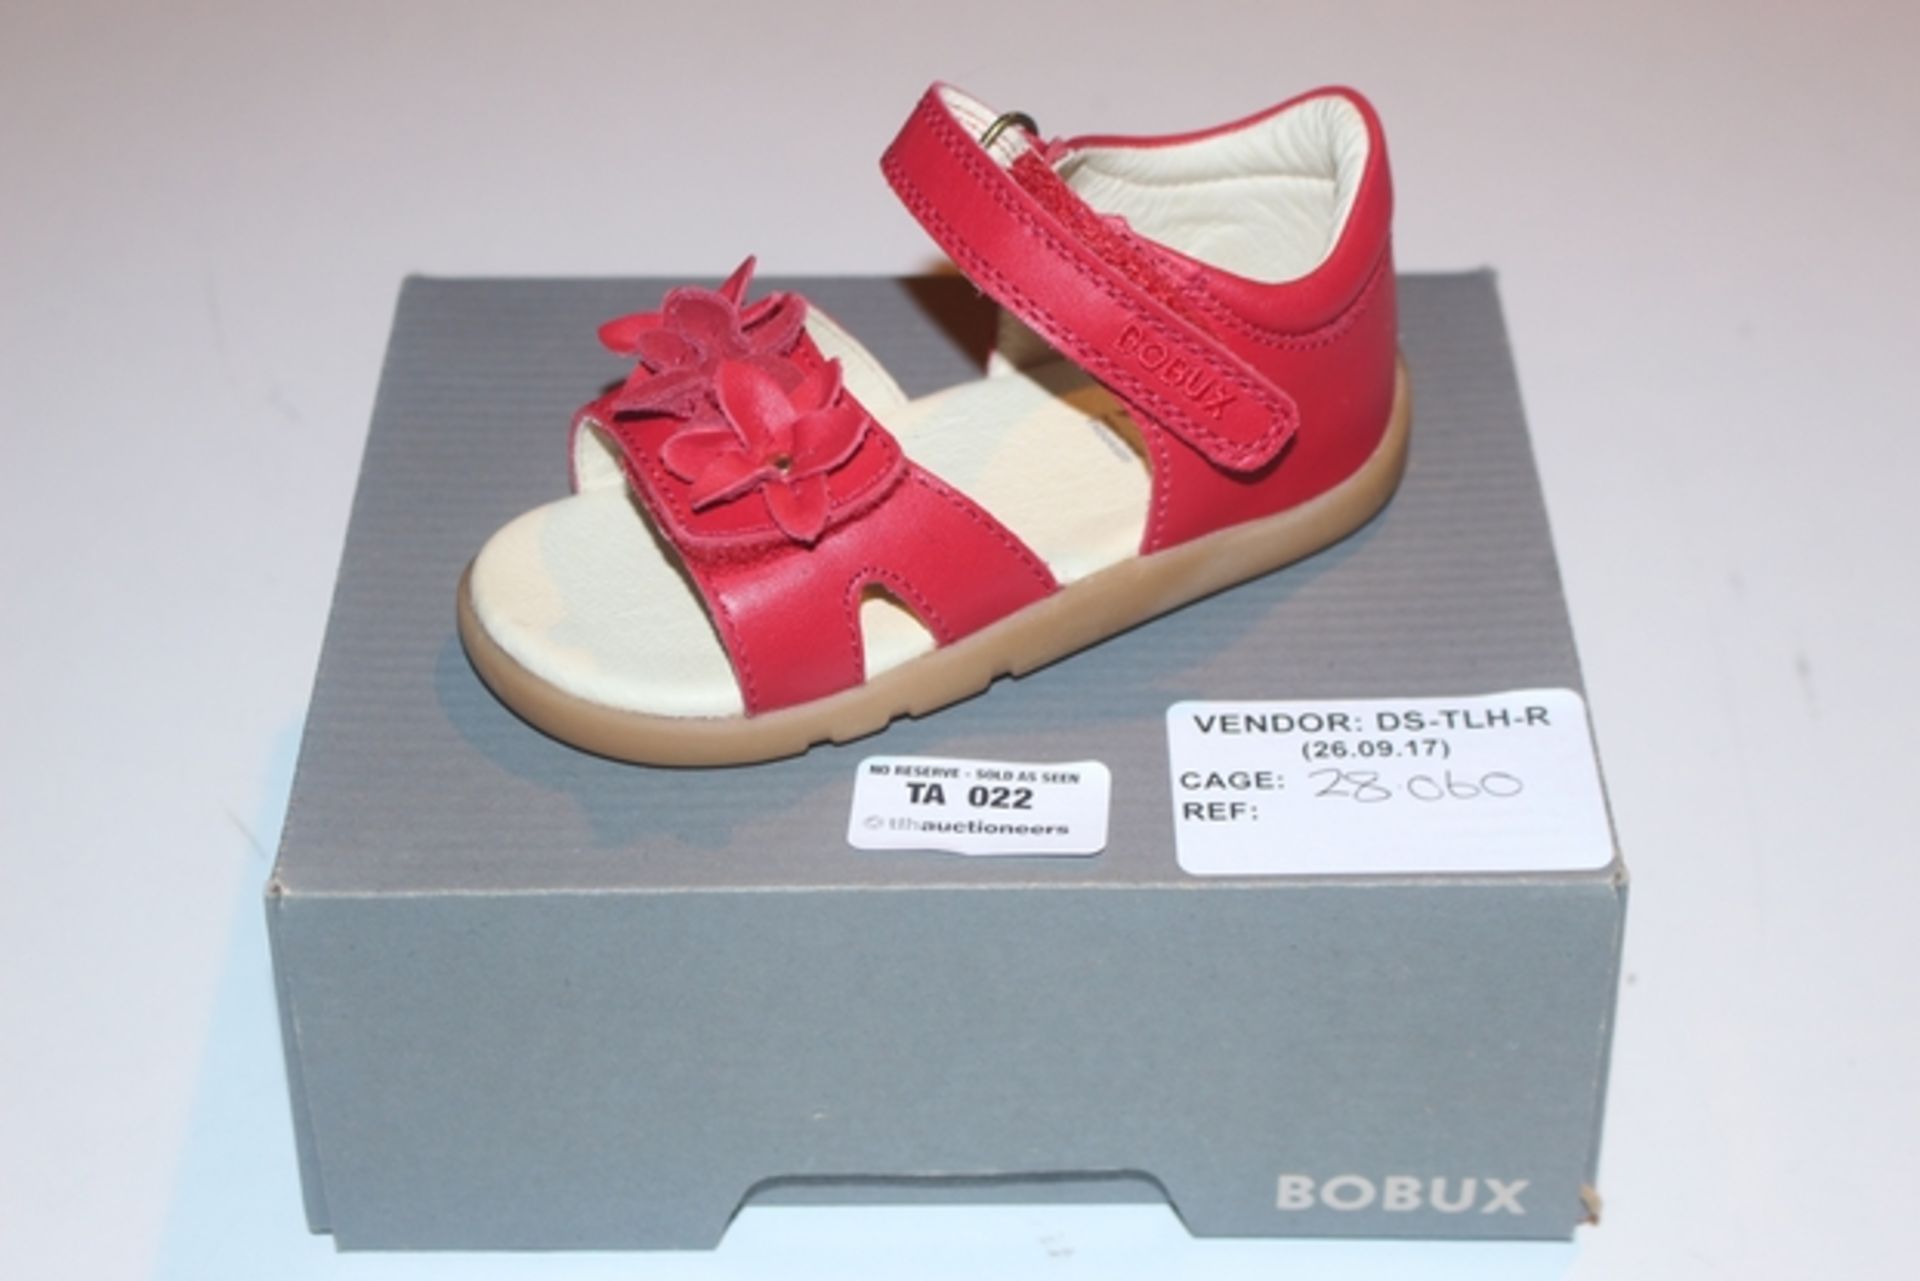 1X BOXED UNUSED PAIR OF BOBUX CHILDREN'S SHOES SIZE 5 RRP £30 (DS-TLH-R) (28.060)